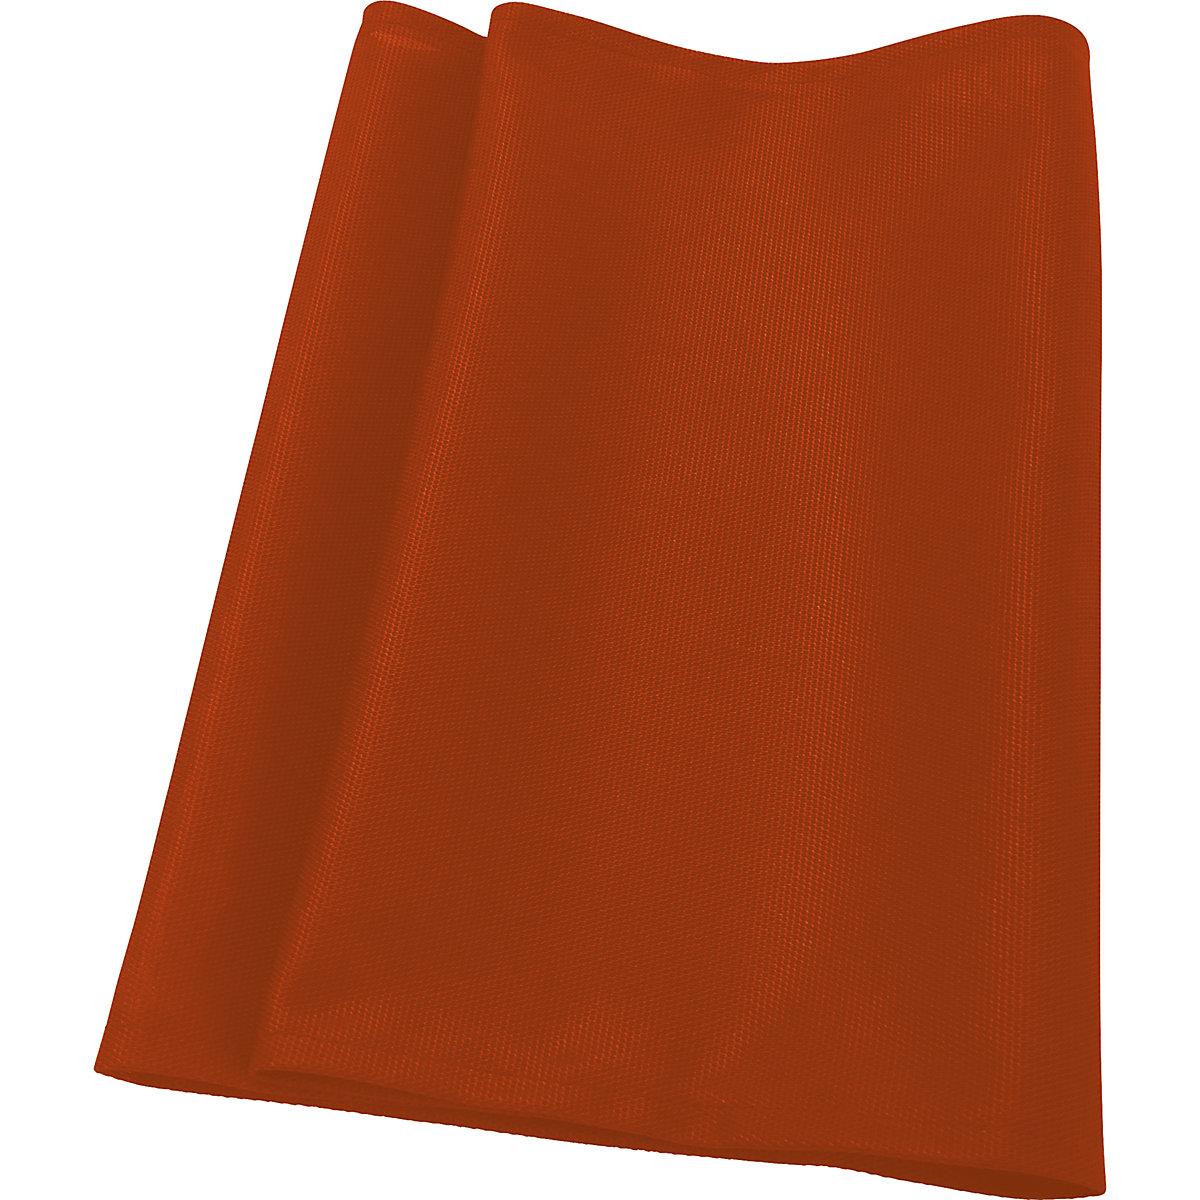 Fabric filter cover – IDEAL